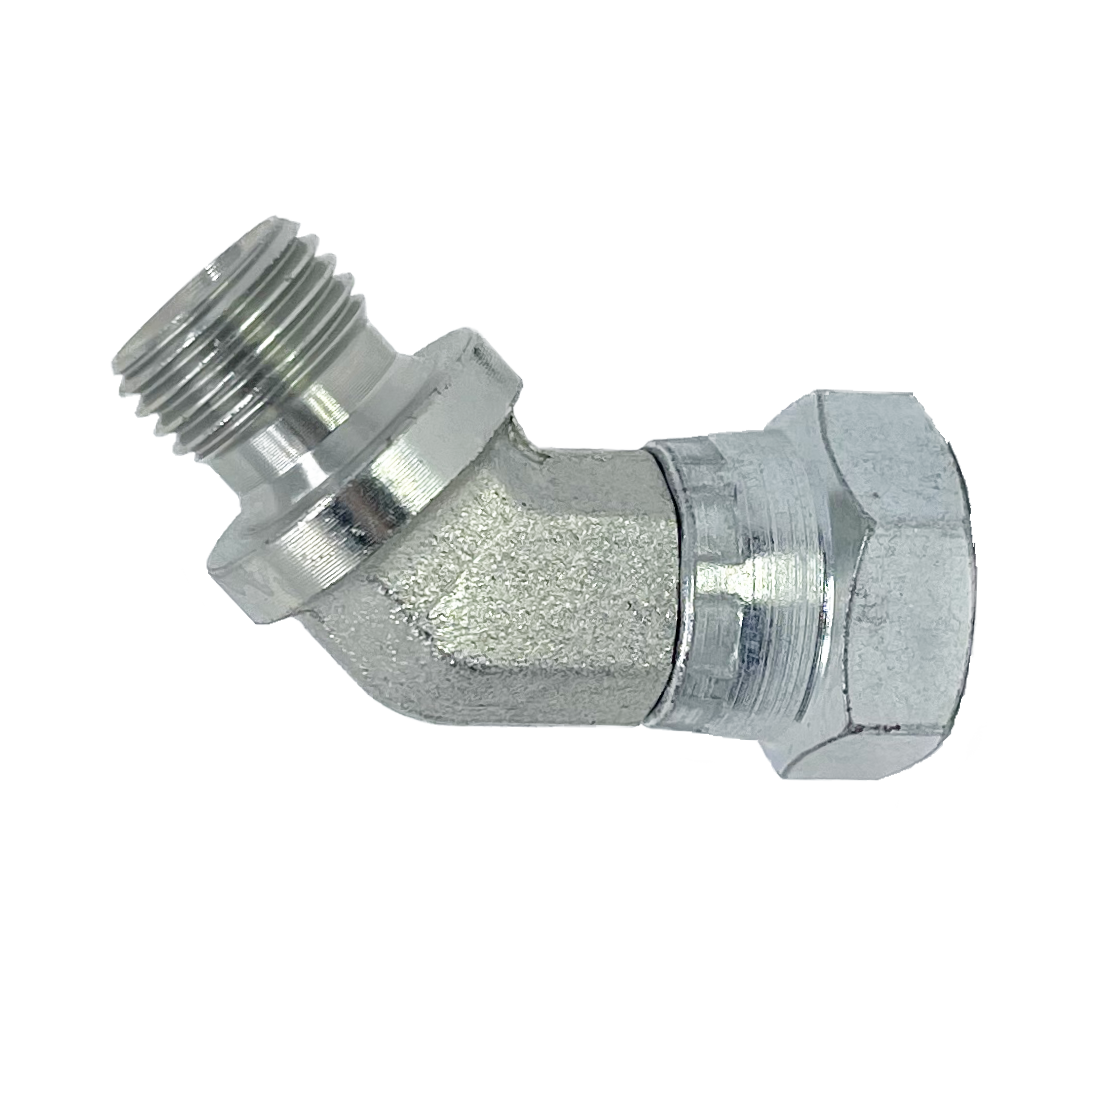 9048-08-08 : Adaptall 45-Degree Adapter, Male 0.5 (1/2") BSPP x Female 0.5 (1/2") BSPP, Carbon Steel